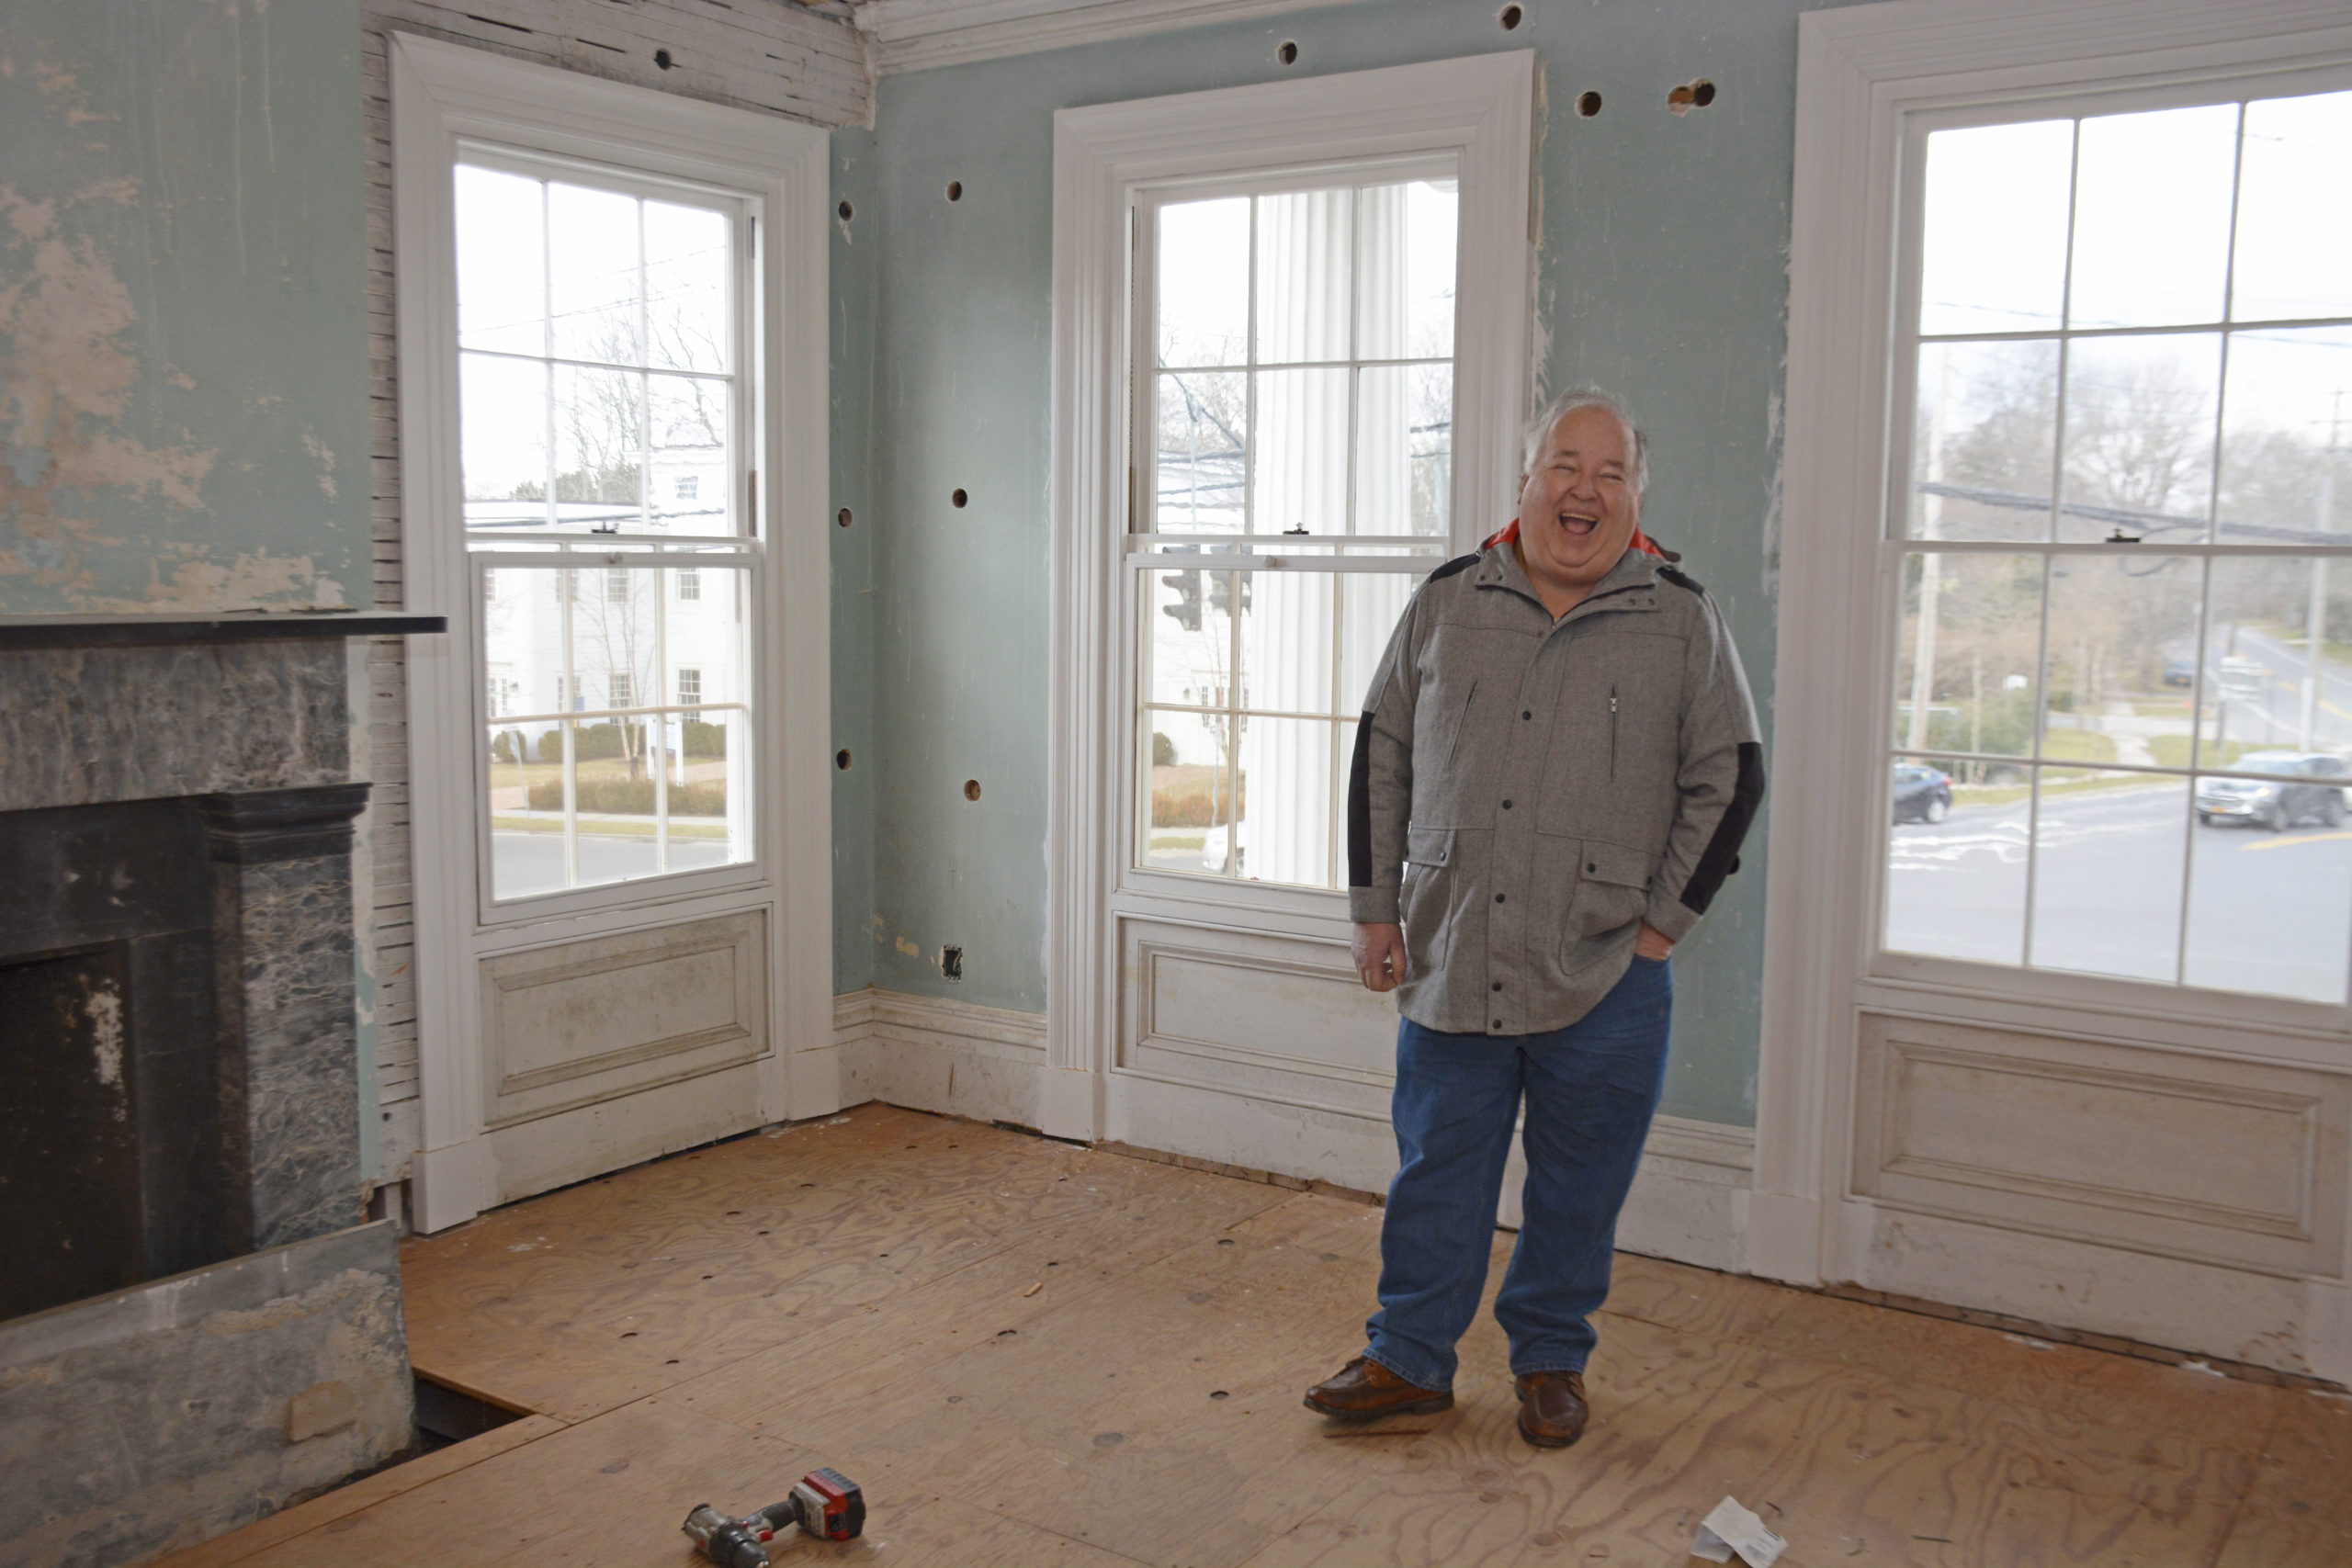 January 17 -- After a decade and a half of construction and funding headaches, John Eilertsen had hoped that the restoration of the circa 1820s house would be completed in 2019. The historic houseowned by Southampton Town and bearing the name of the 19th century miniature portrait painter and former owner—would serve as the new headquarters and exhibition space for the Bridgehampton Museum. Sadly, Mr. Eilertsen, the museum’s executive director, said it will not be open to the public until the summer of 2020. “We are trying to preserve as much as we can,” Mr. Eilertsen said. “With that being said—while you don’t want to correct the mistakes of the past when you are preserving—for safety and the integrity of the building, we have had to make some changes. and exhibition space for the Bridgehampton Museum.